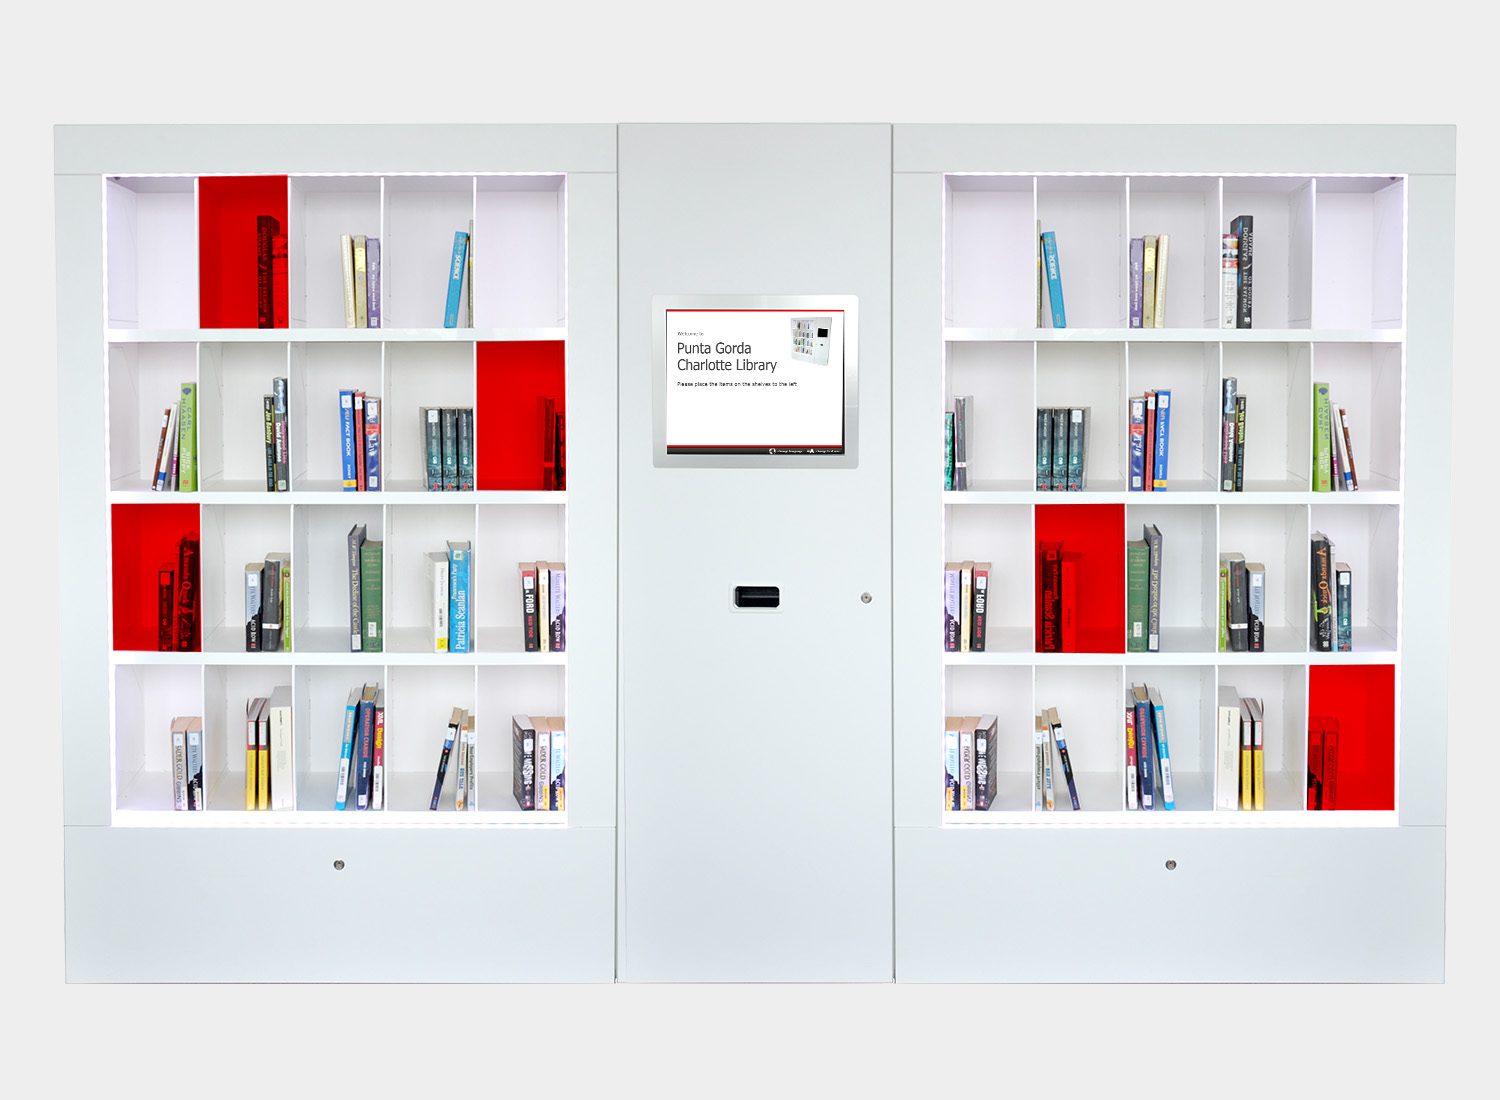 Intelligent shelving with books